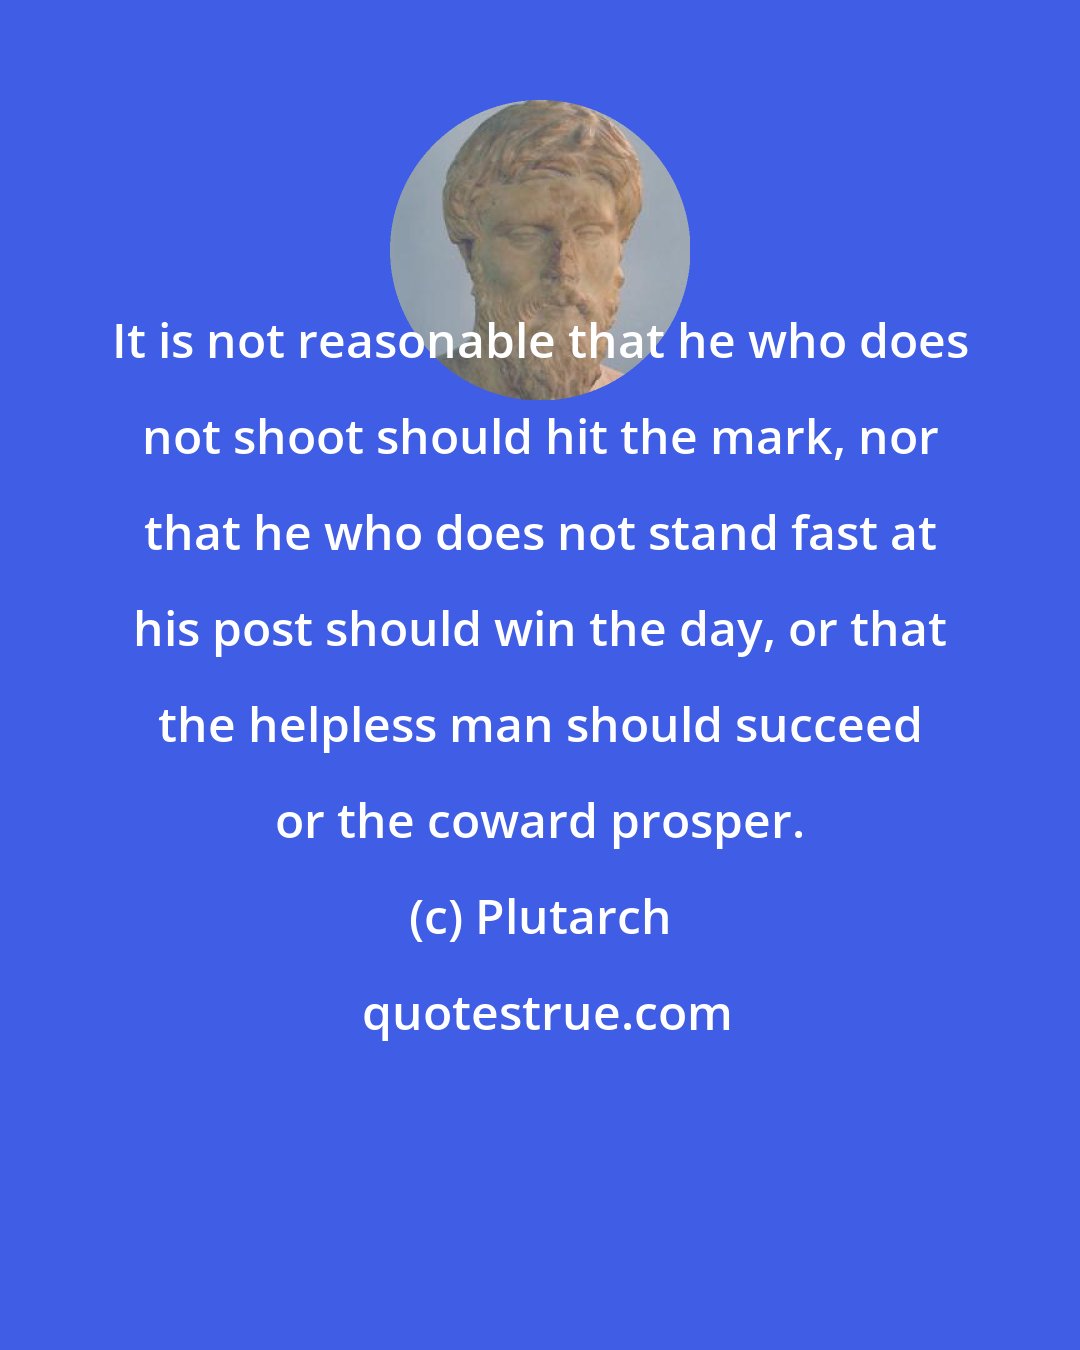 Plutarch: It is not reasonable that he who does not shoot should hit the mark, nor that he who does not stand fast at his post should win the day, or that the helpless man should succeed or the coward prosper.